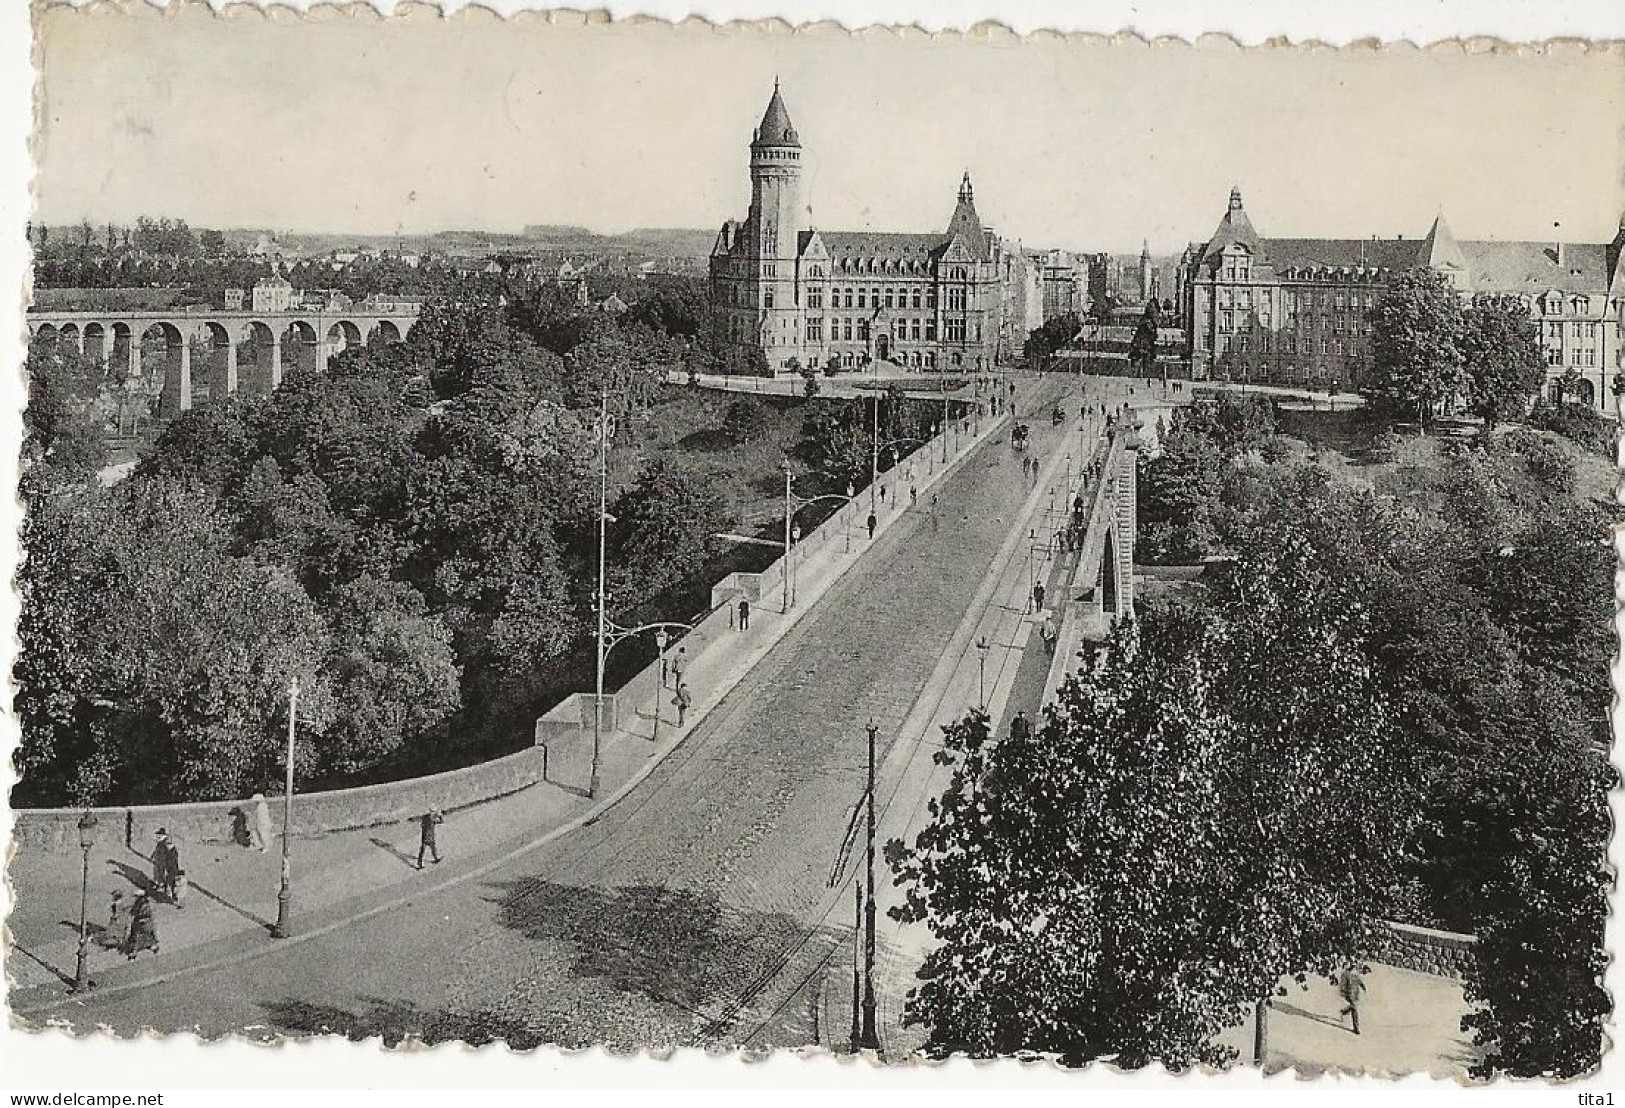 299 -   Luxembourg - Avenue Et Pont Adolphe - Luxemburg - Town